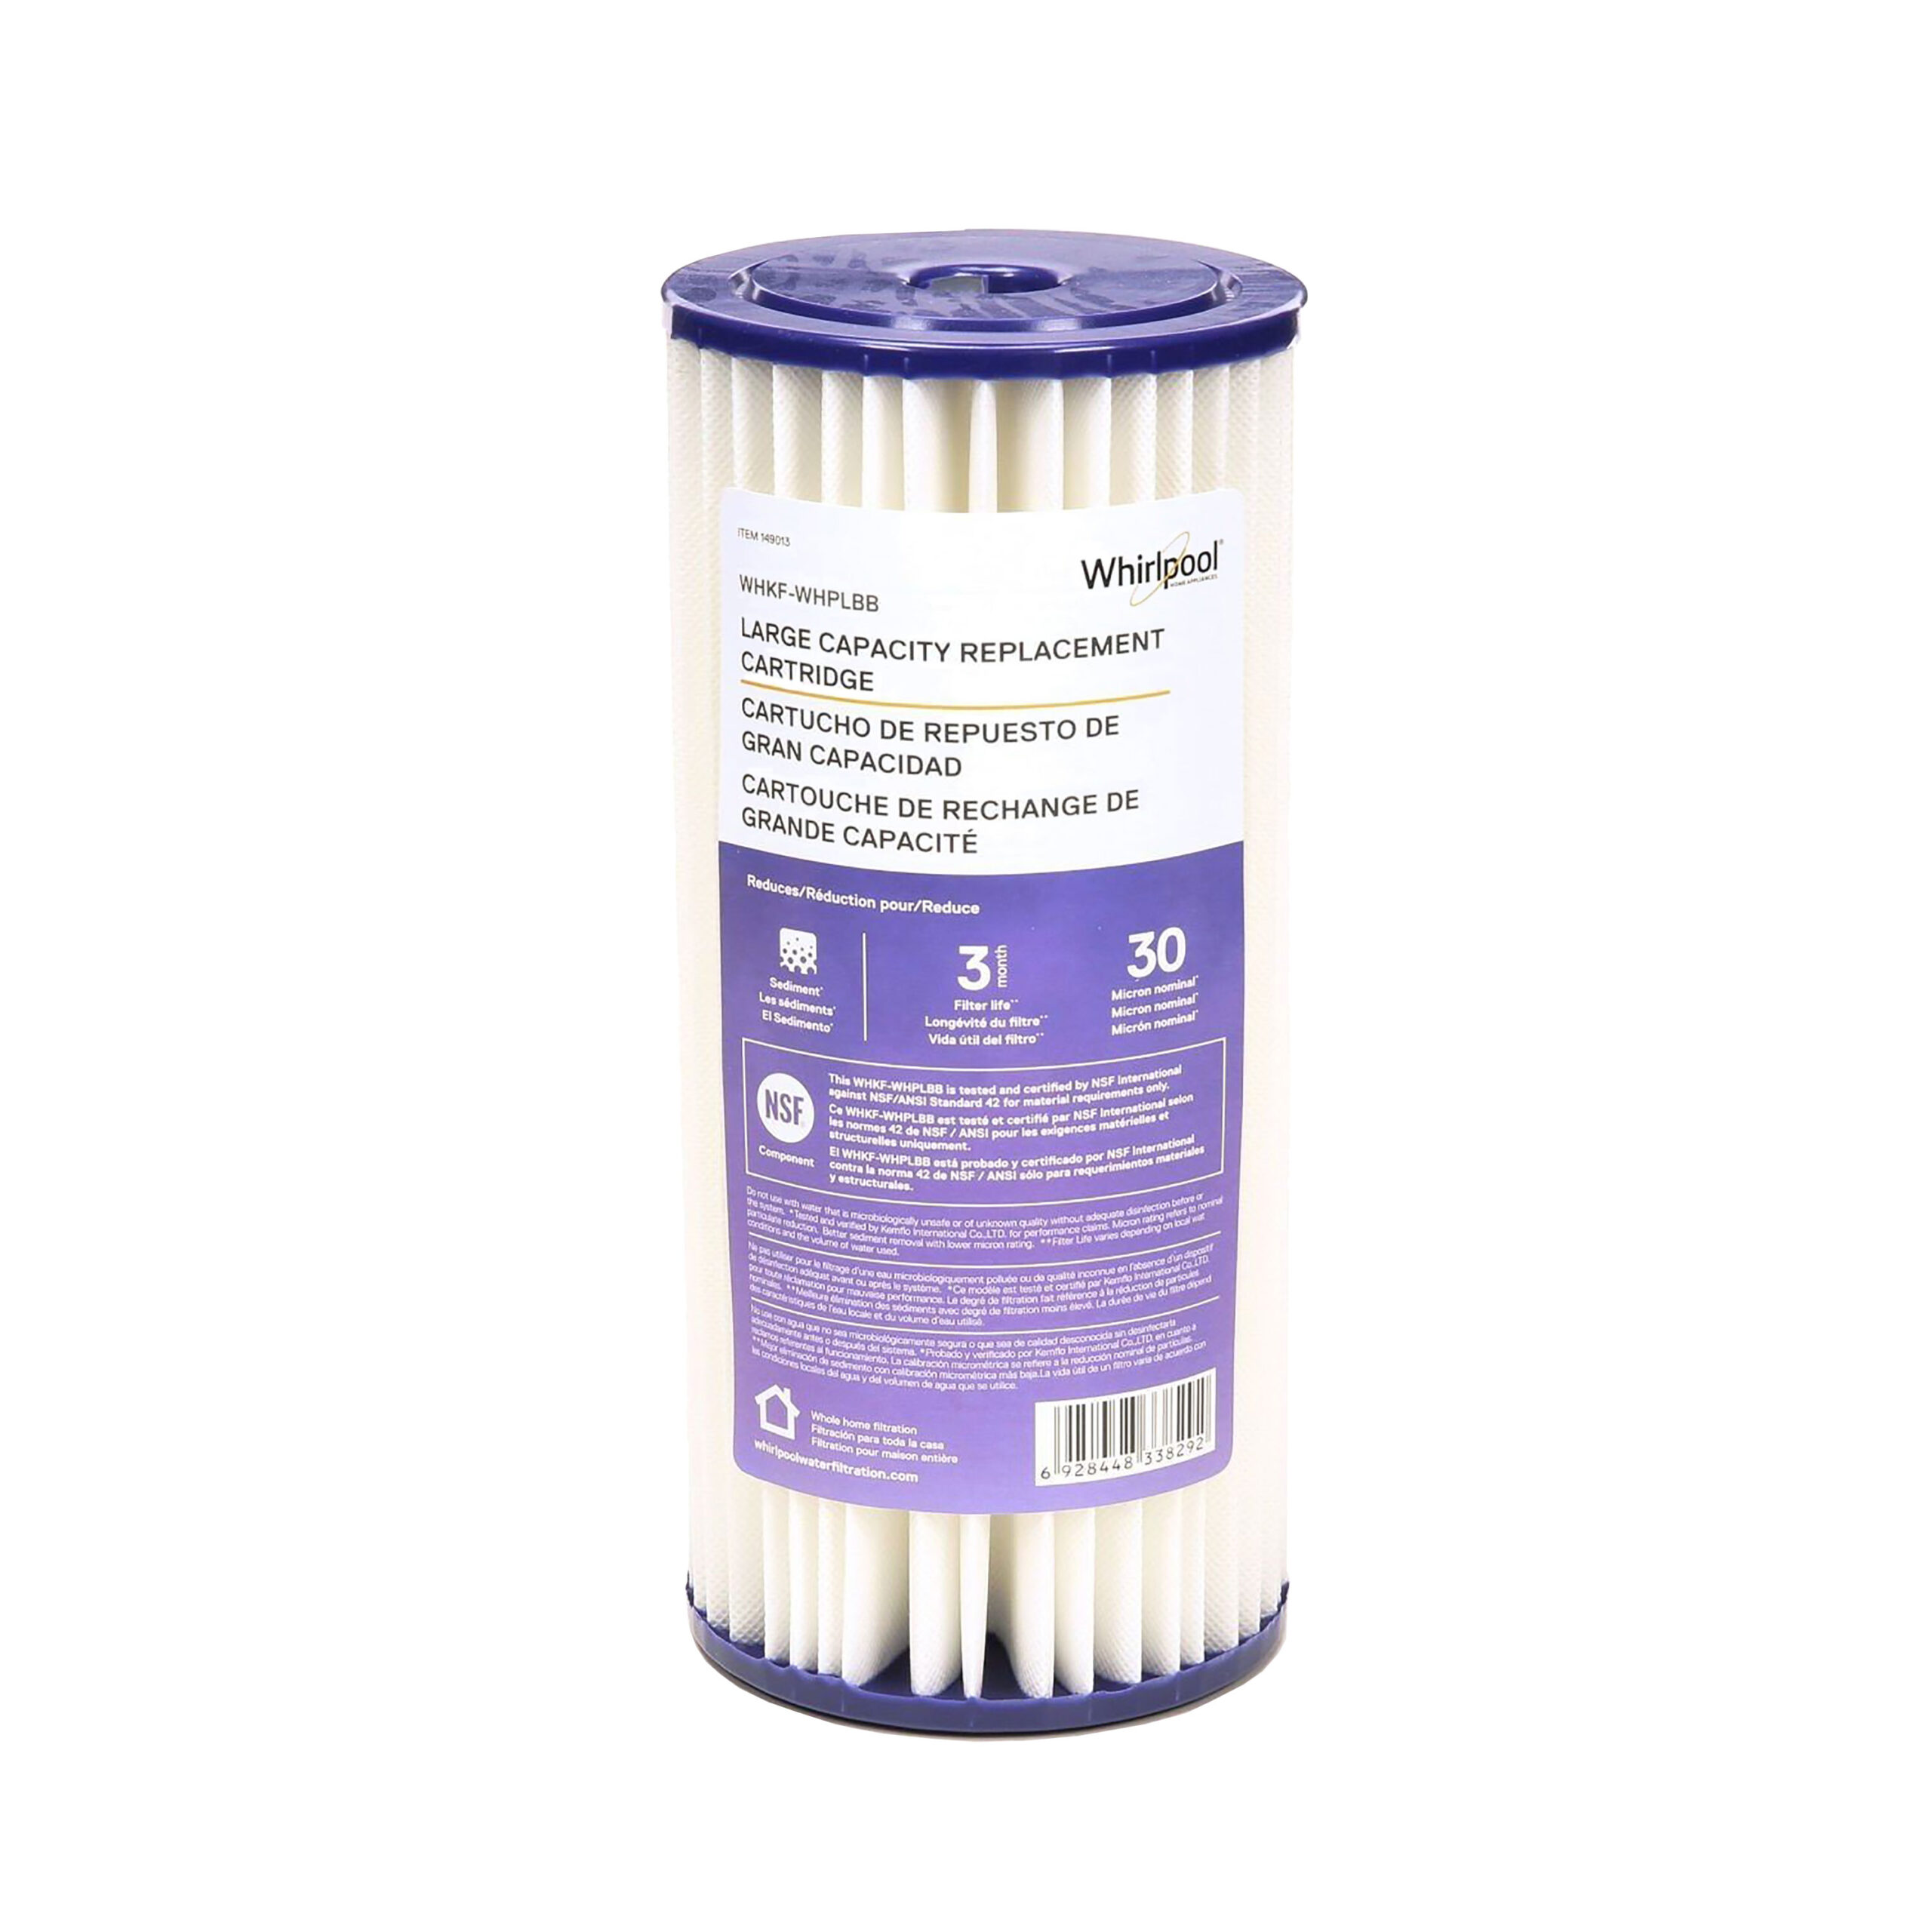 Whole Capacity Filtration Water Whirlpool® Pleated - -1 Filter Home Large pk Whirlpool WHKF-WHPLBB